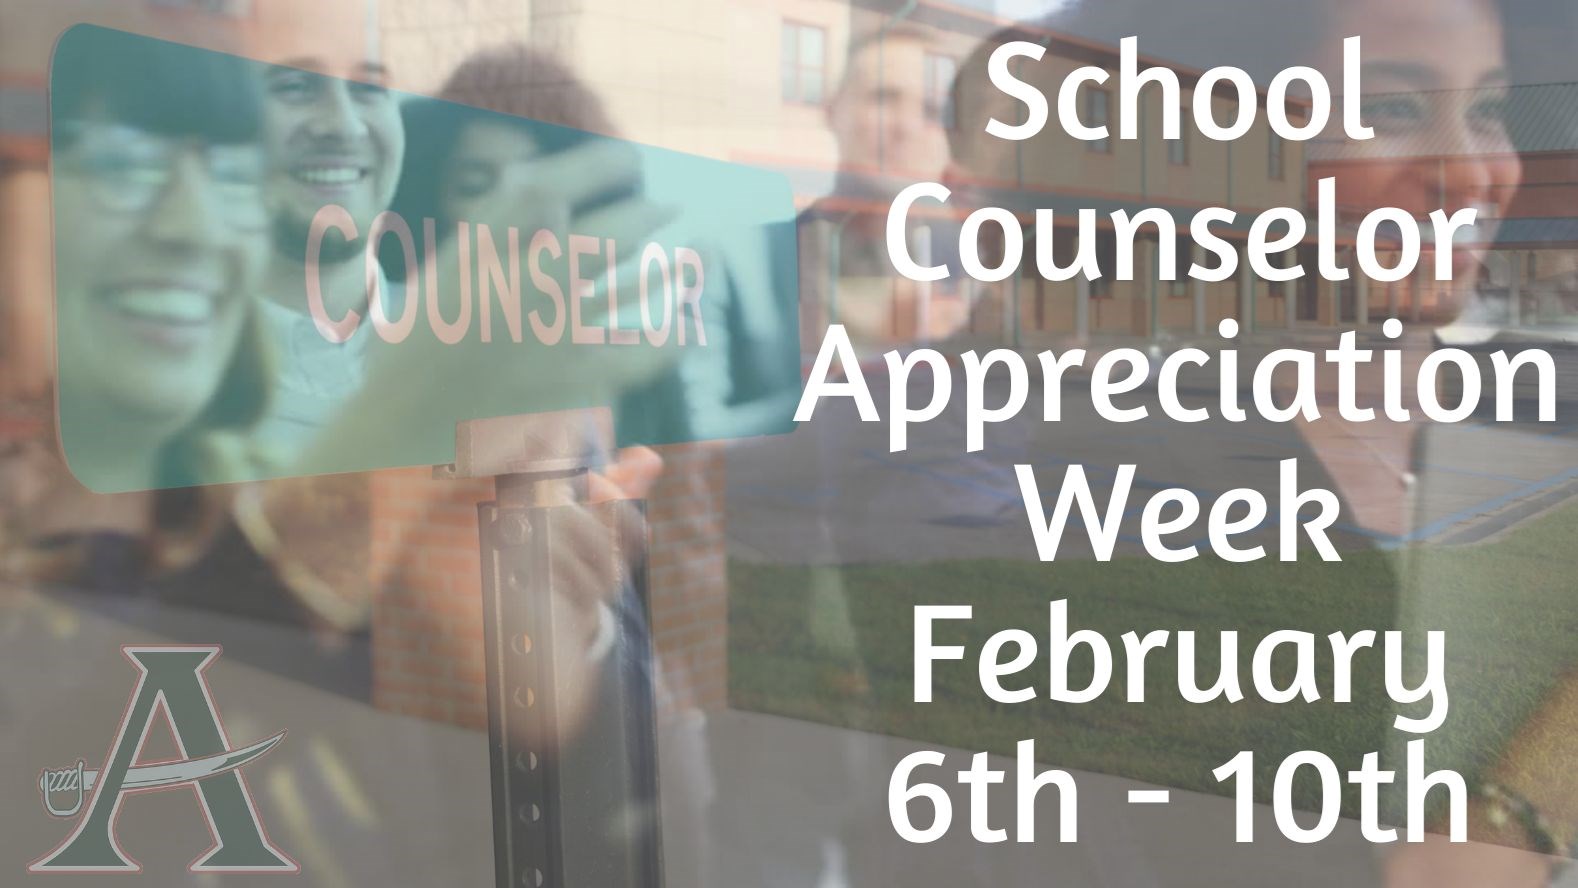 Spotlight Image - Celebrate Our Counselors!